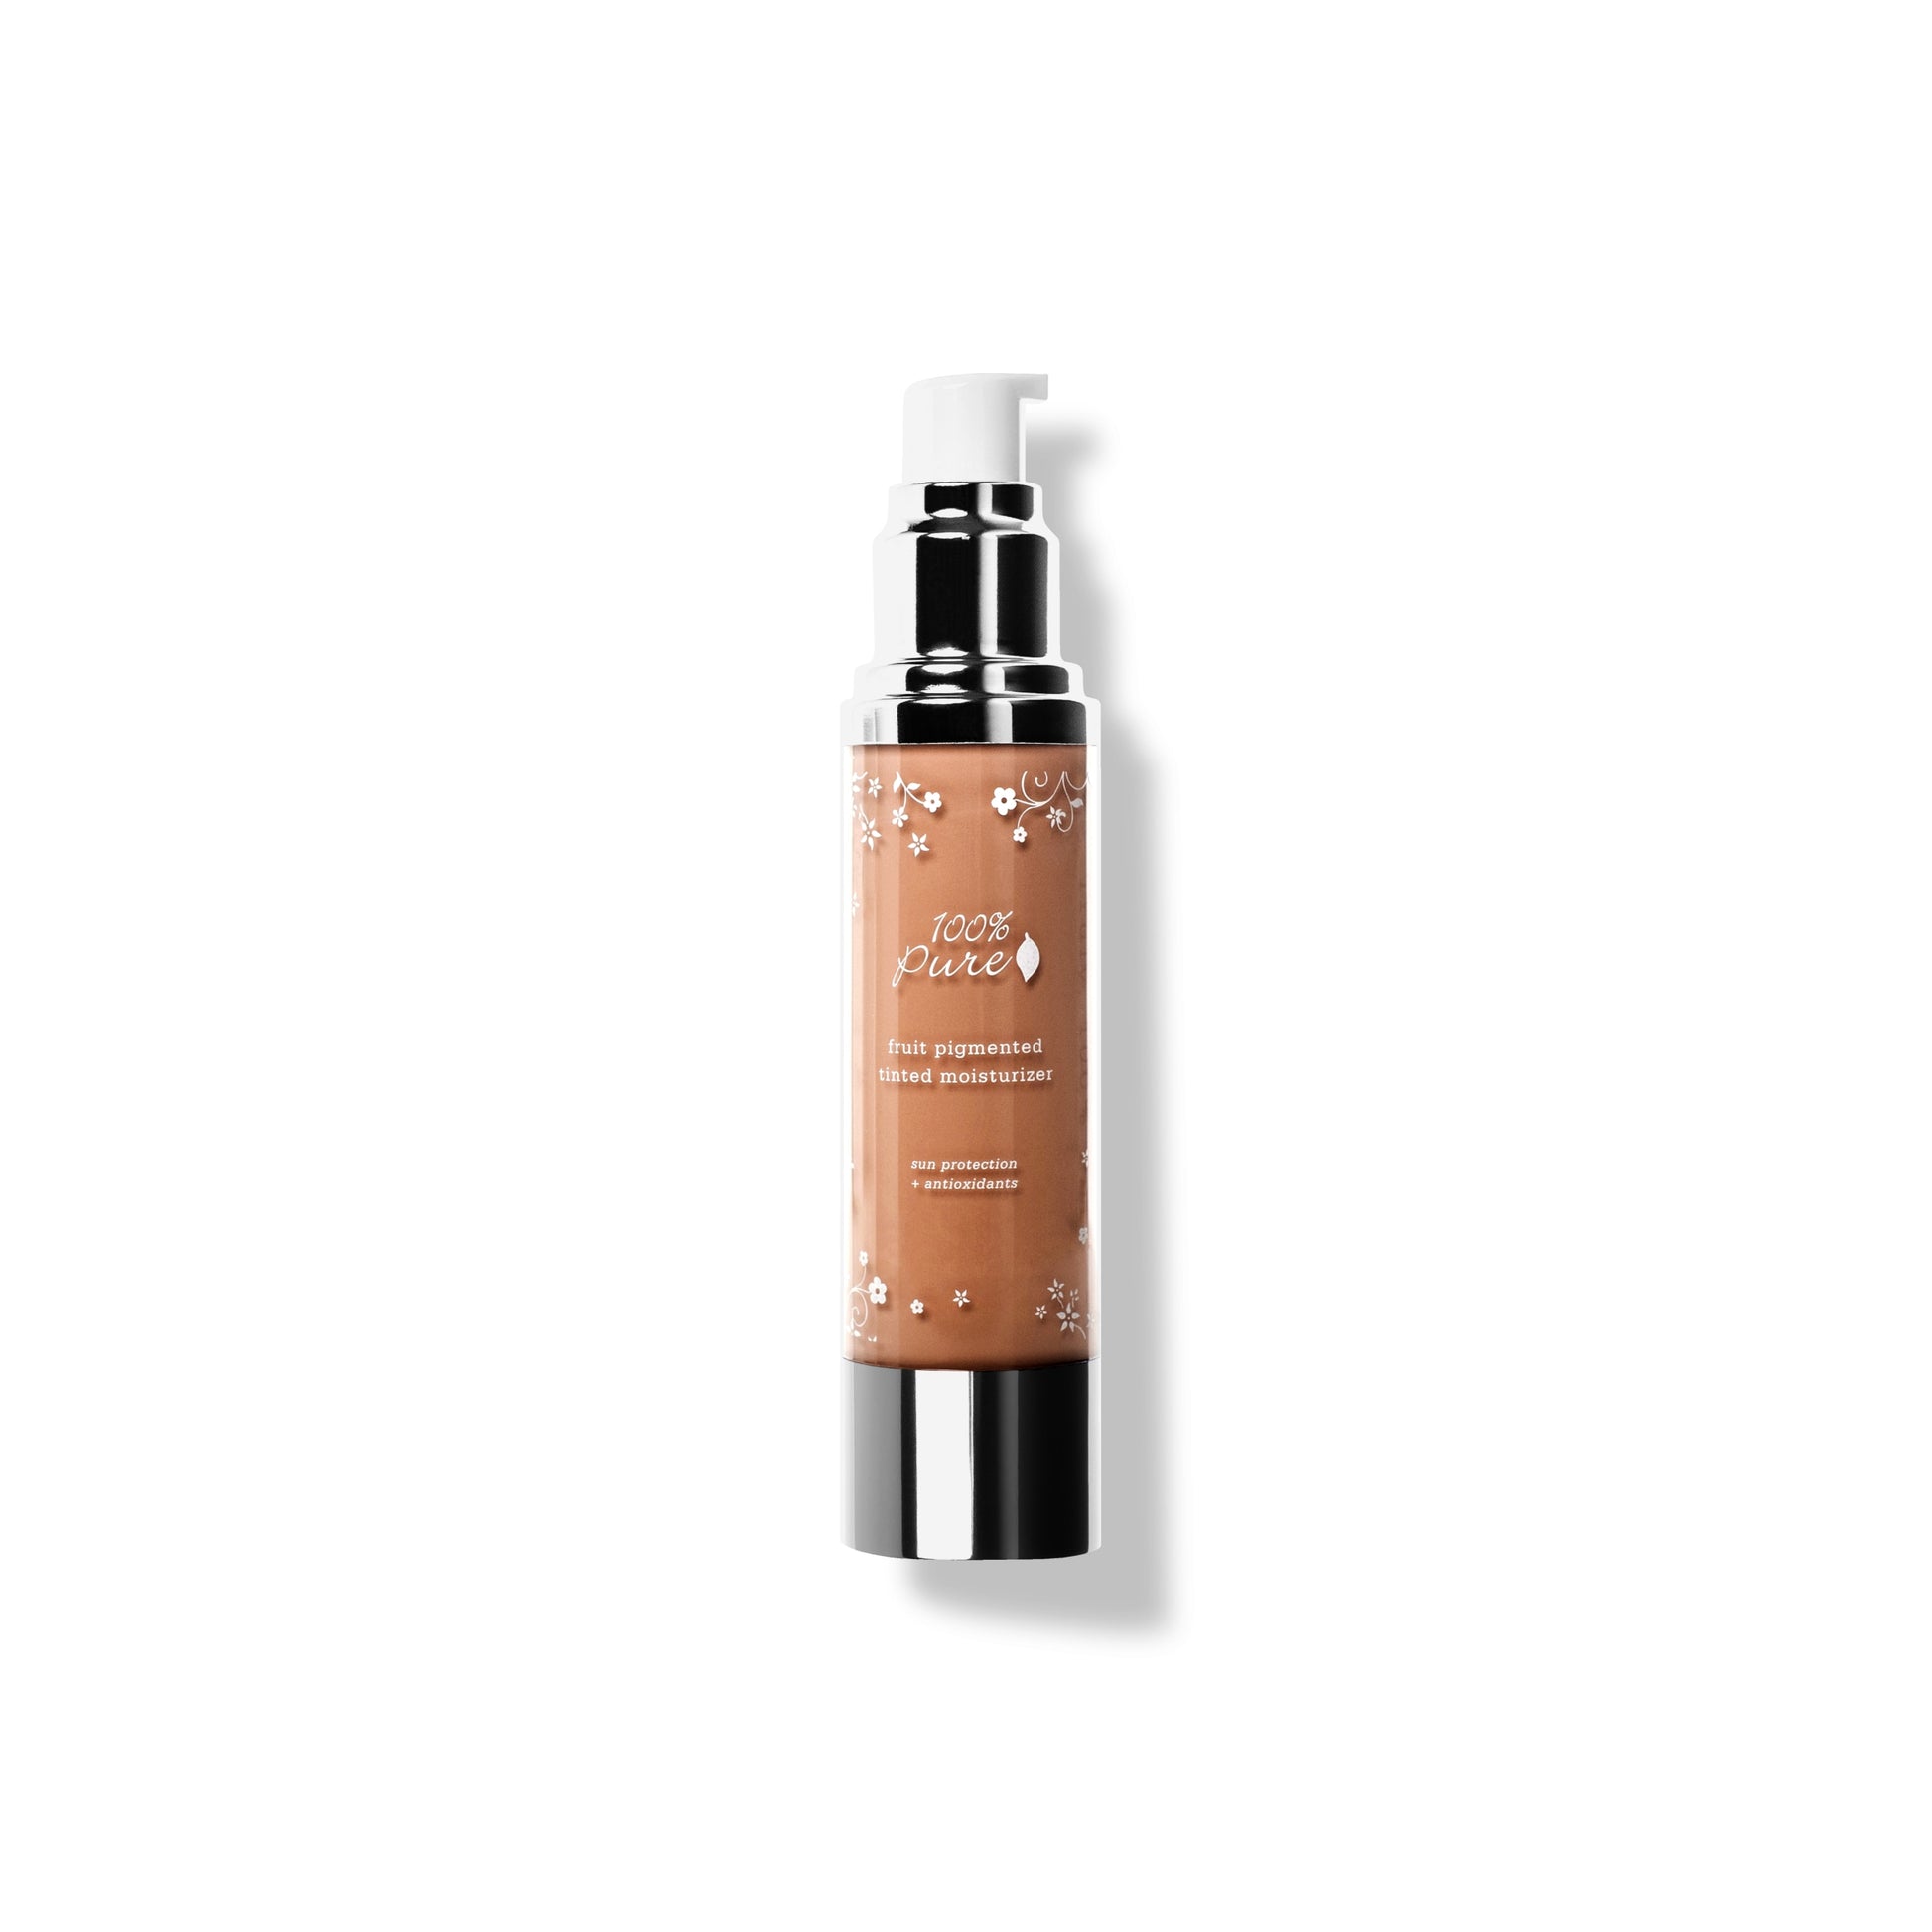 100% PURE Fruit Pigmented Tinted Moisturizer toffee